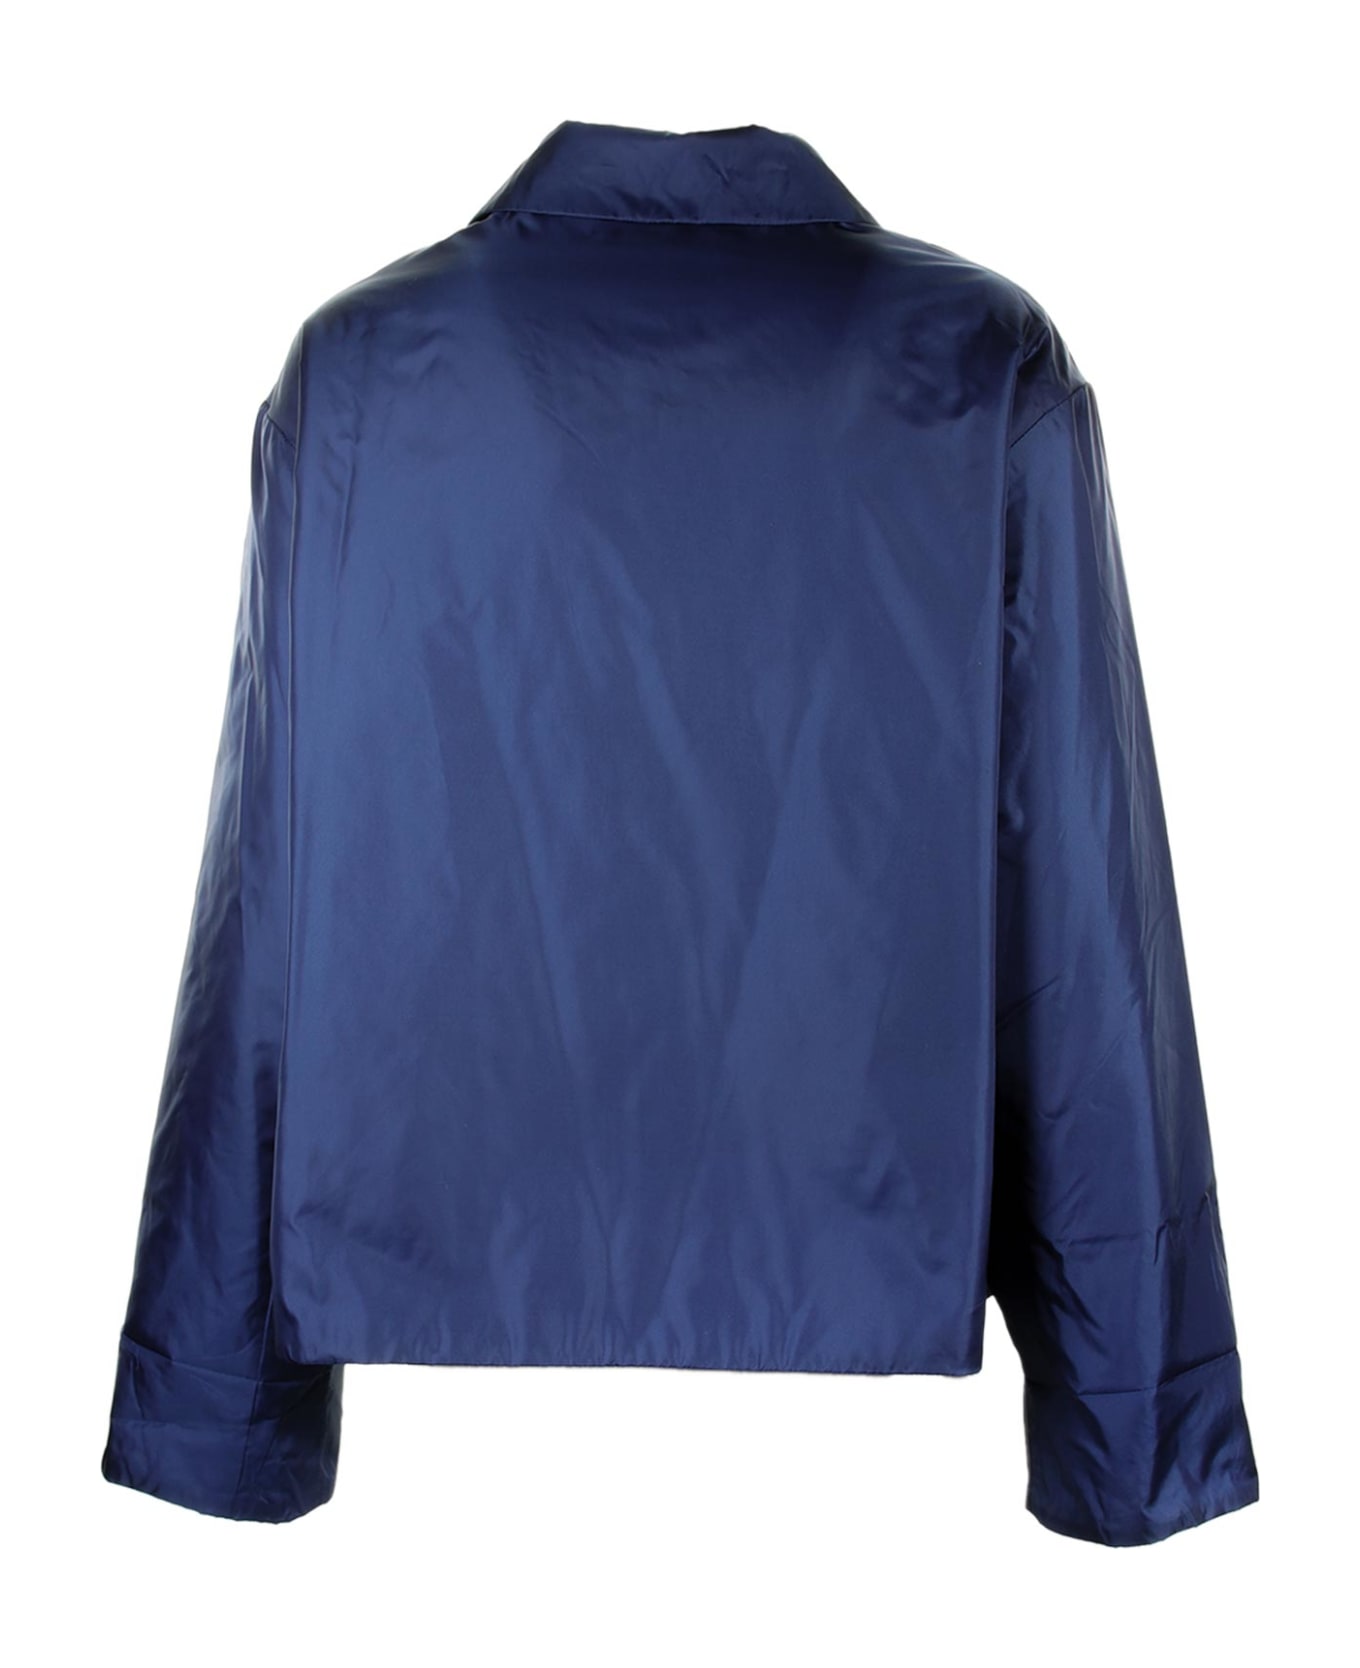 Aspesi Blue Jacket With Buttons - BLUETTE